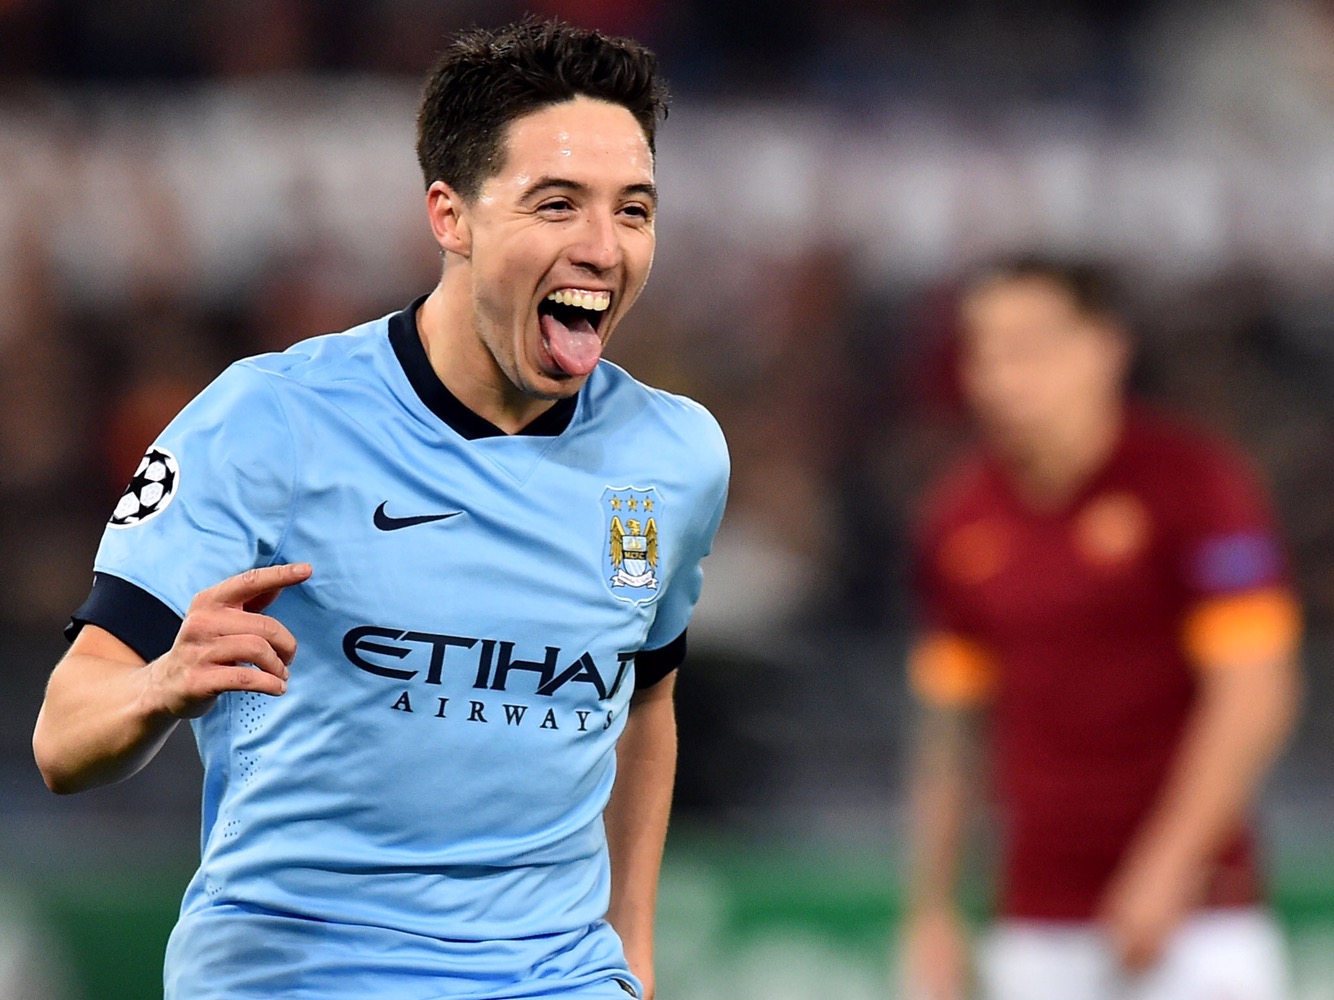 According to French newspaper L’equipe, Samir Nasri would like a move to Mi...